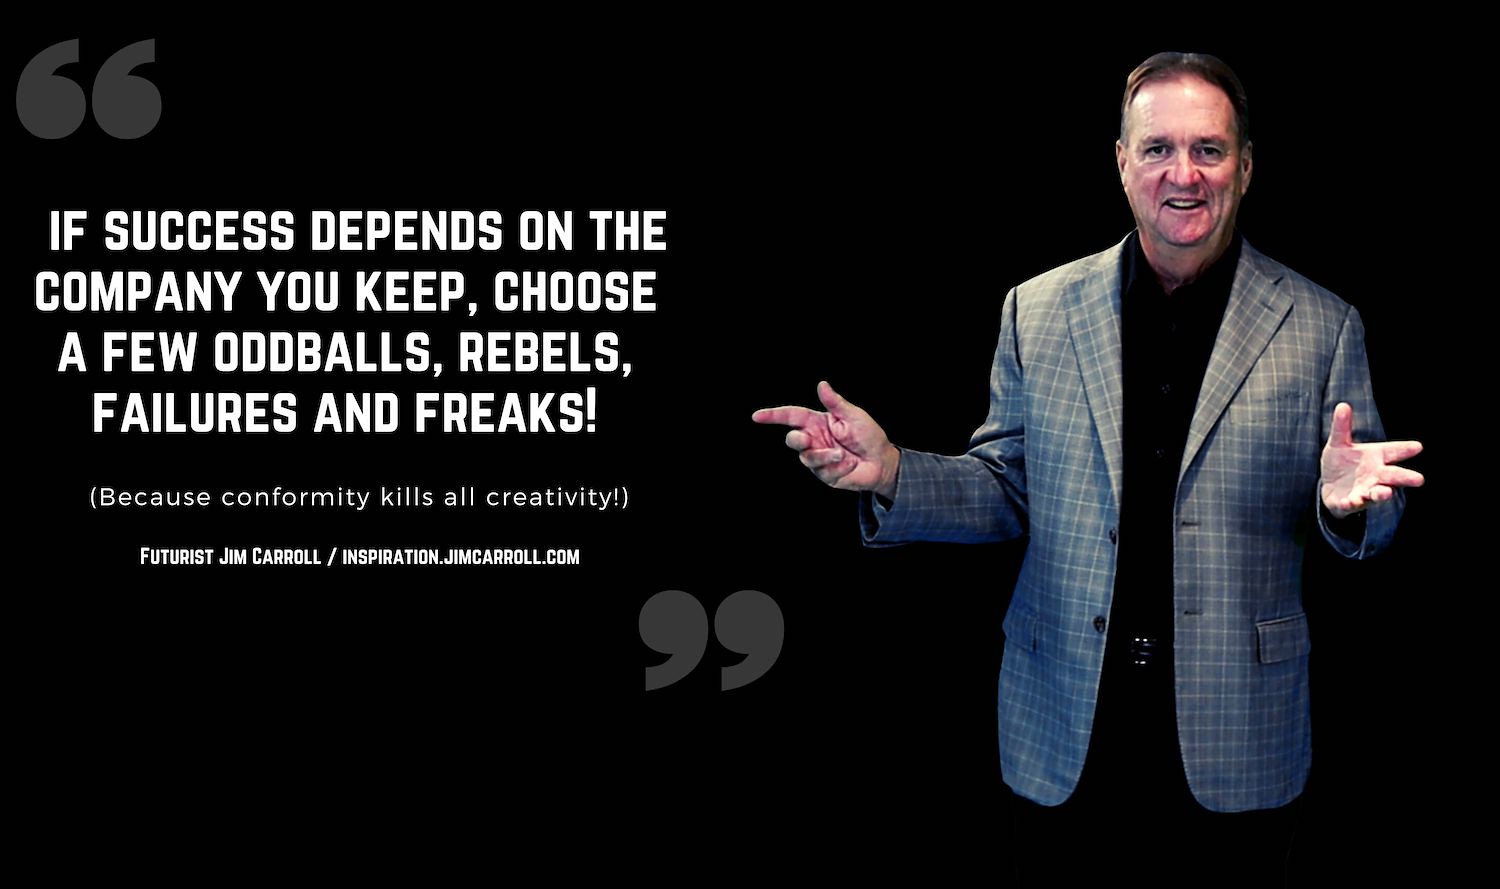 "If success depends on the company you keep, choose a few oddballs, rebels, failures and freaks! (Because conformity kills all creativity!)" - Futurist Jim Carroll